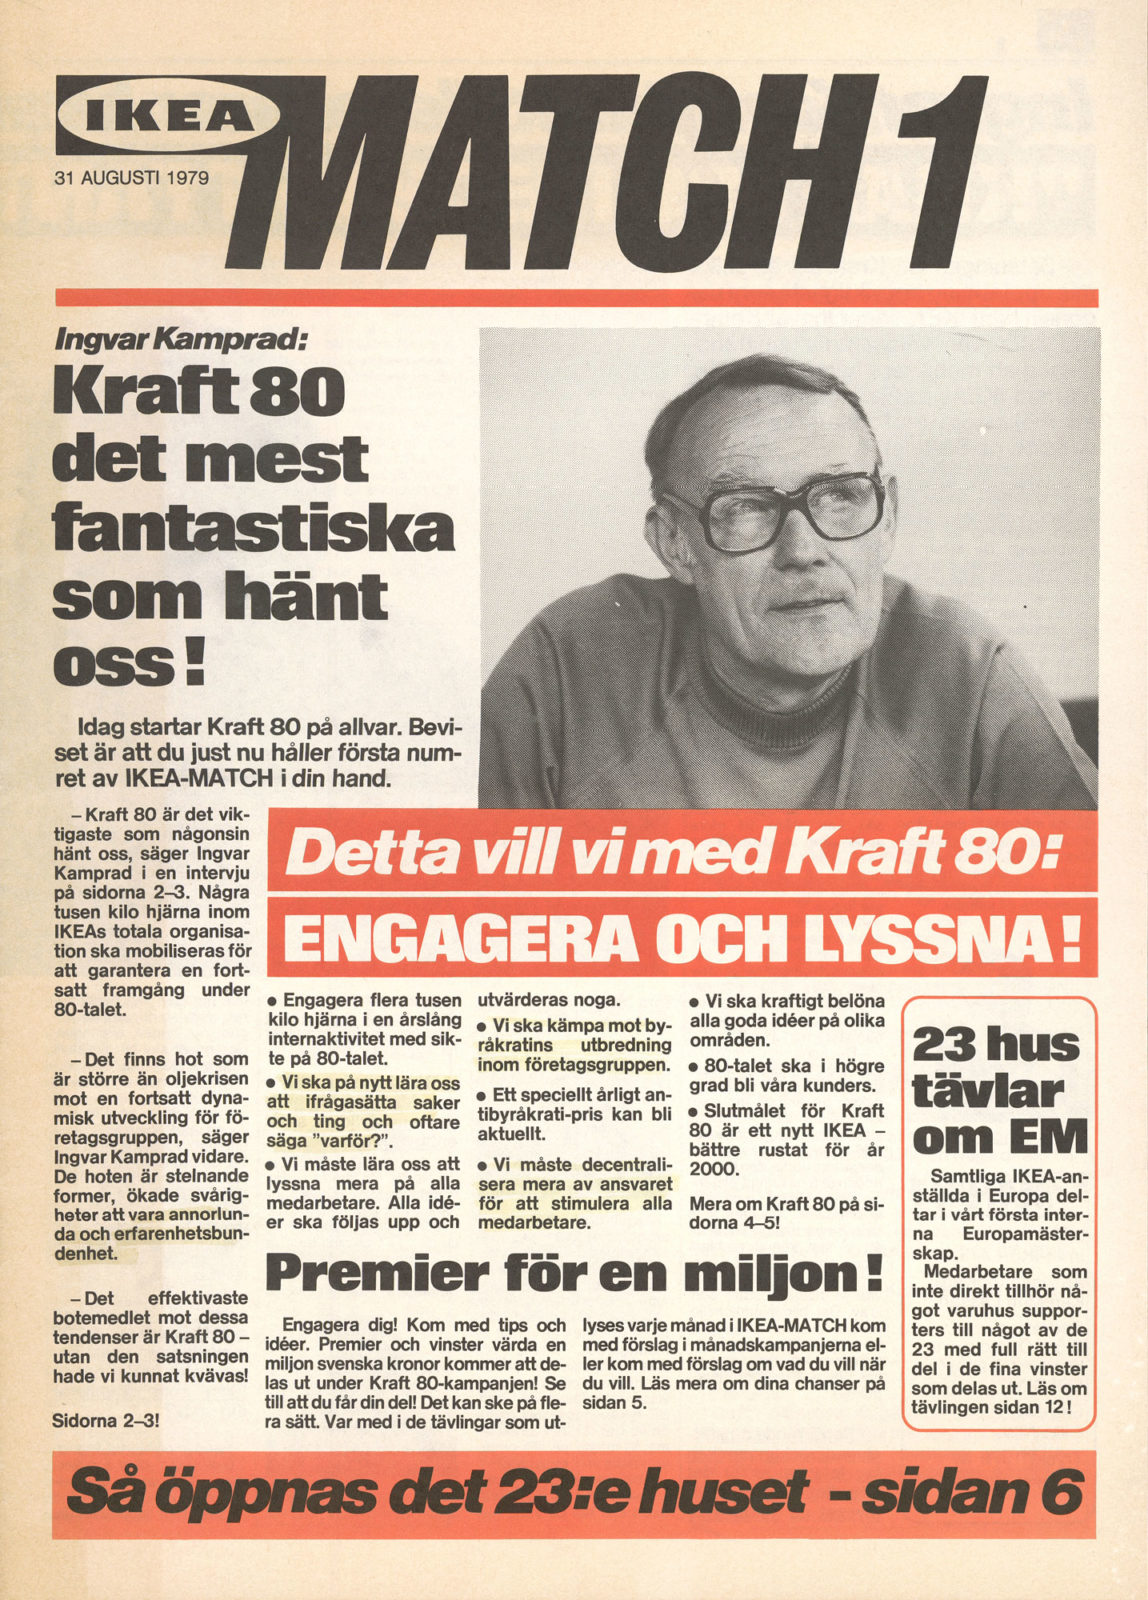 Cover of internal IKEA tabloid MATCH with photo of Ingvar Kamprad and headline about the project Strength 80.